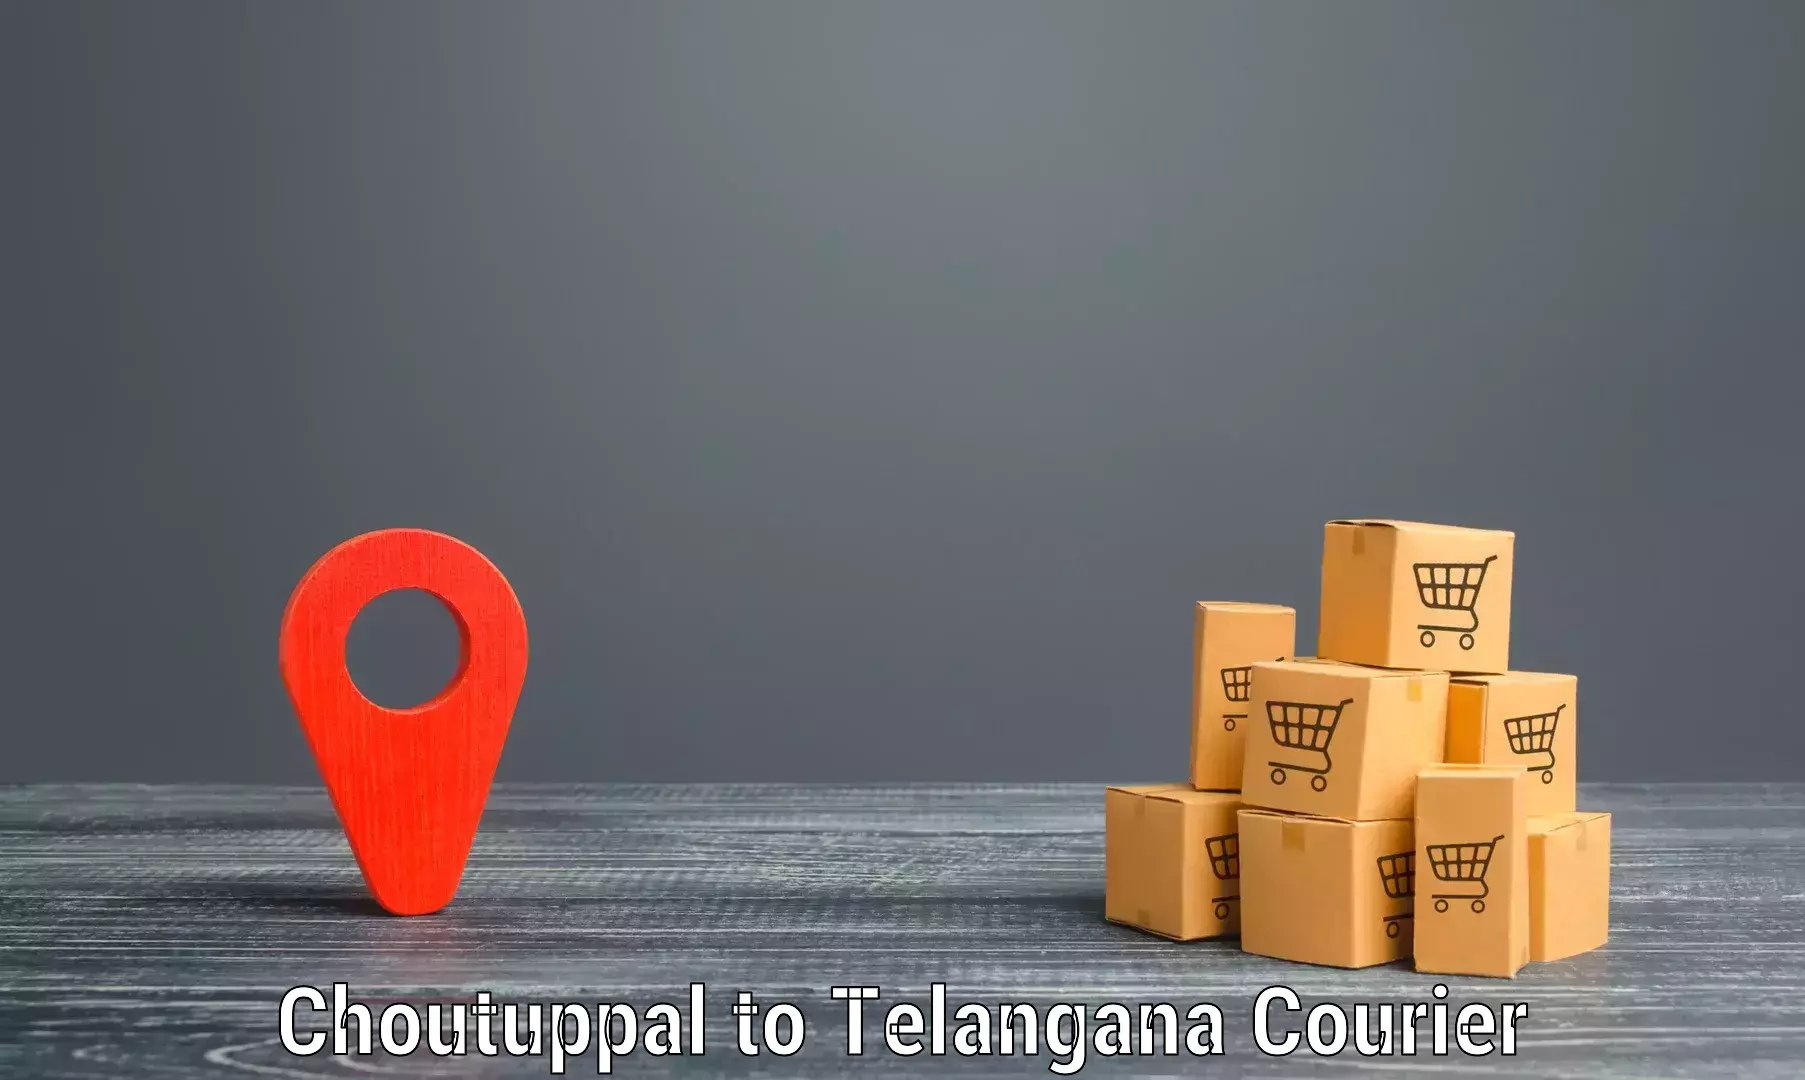 Easy return solutions in Choutuppal to Marikal